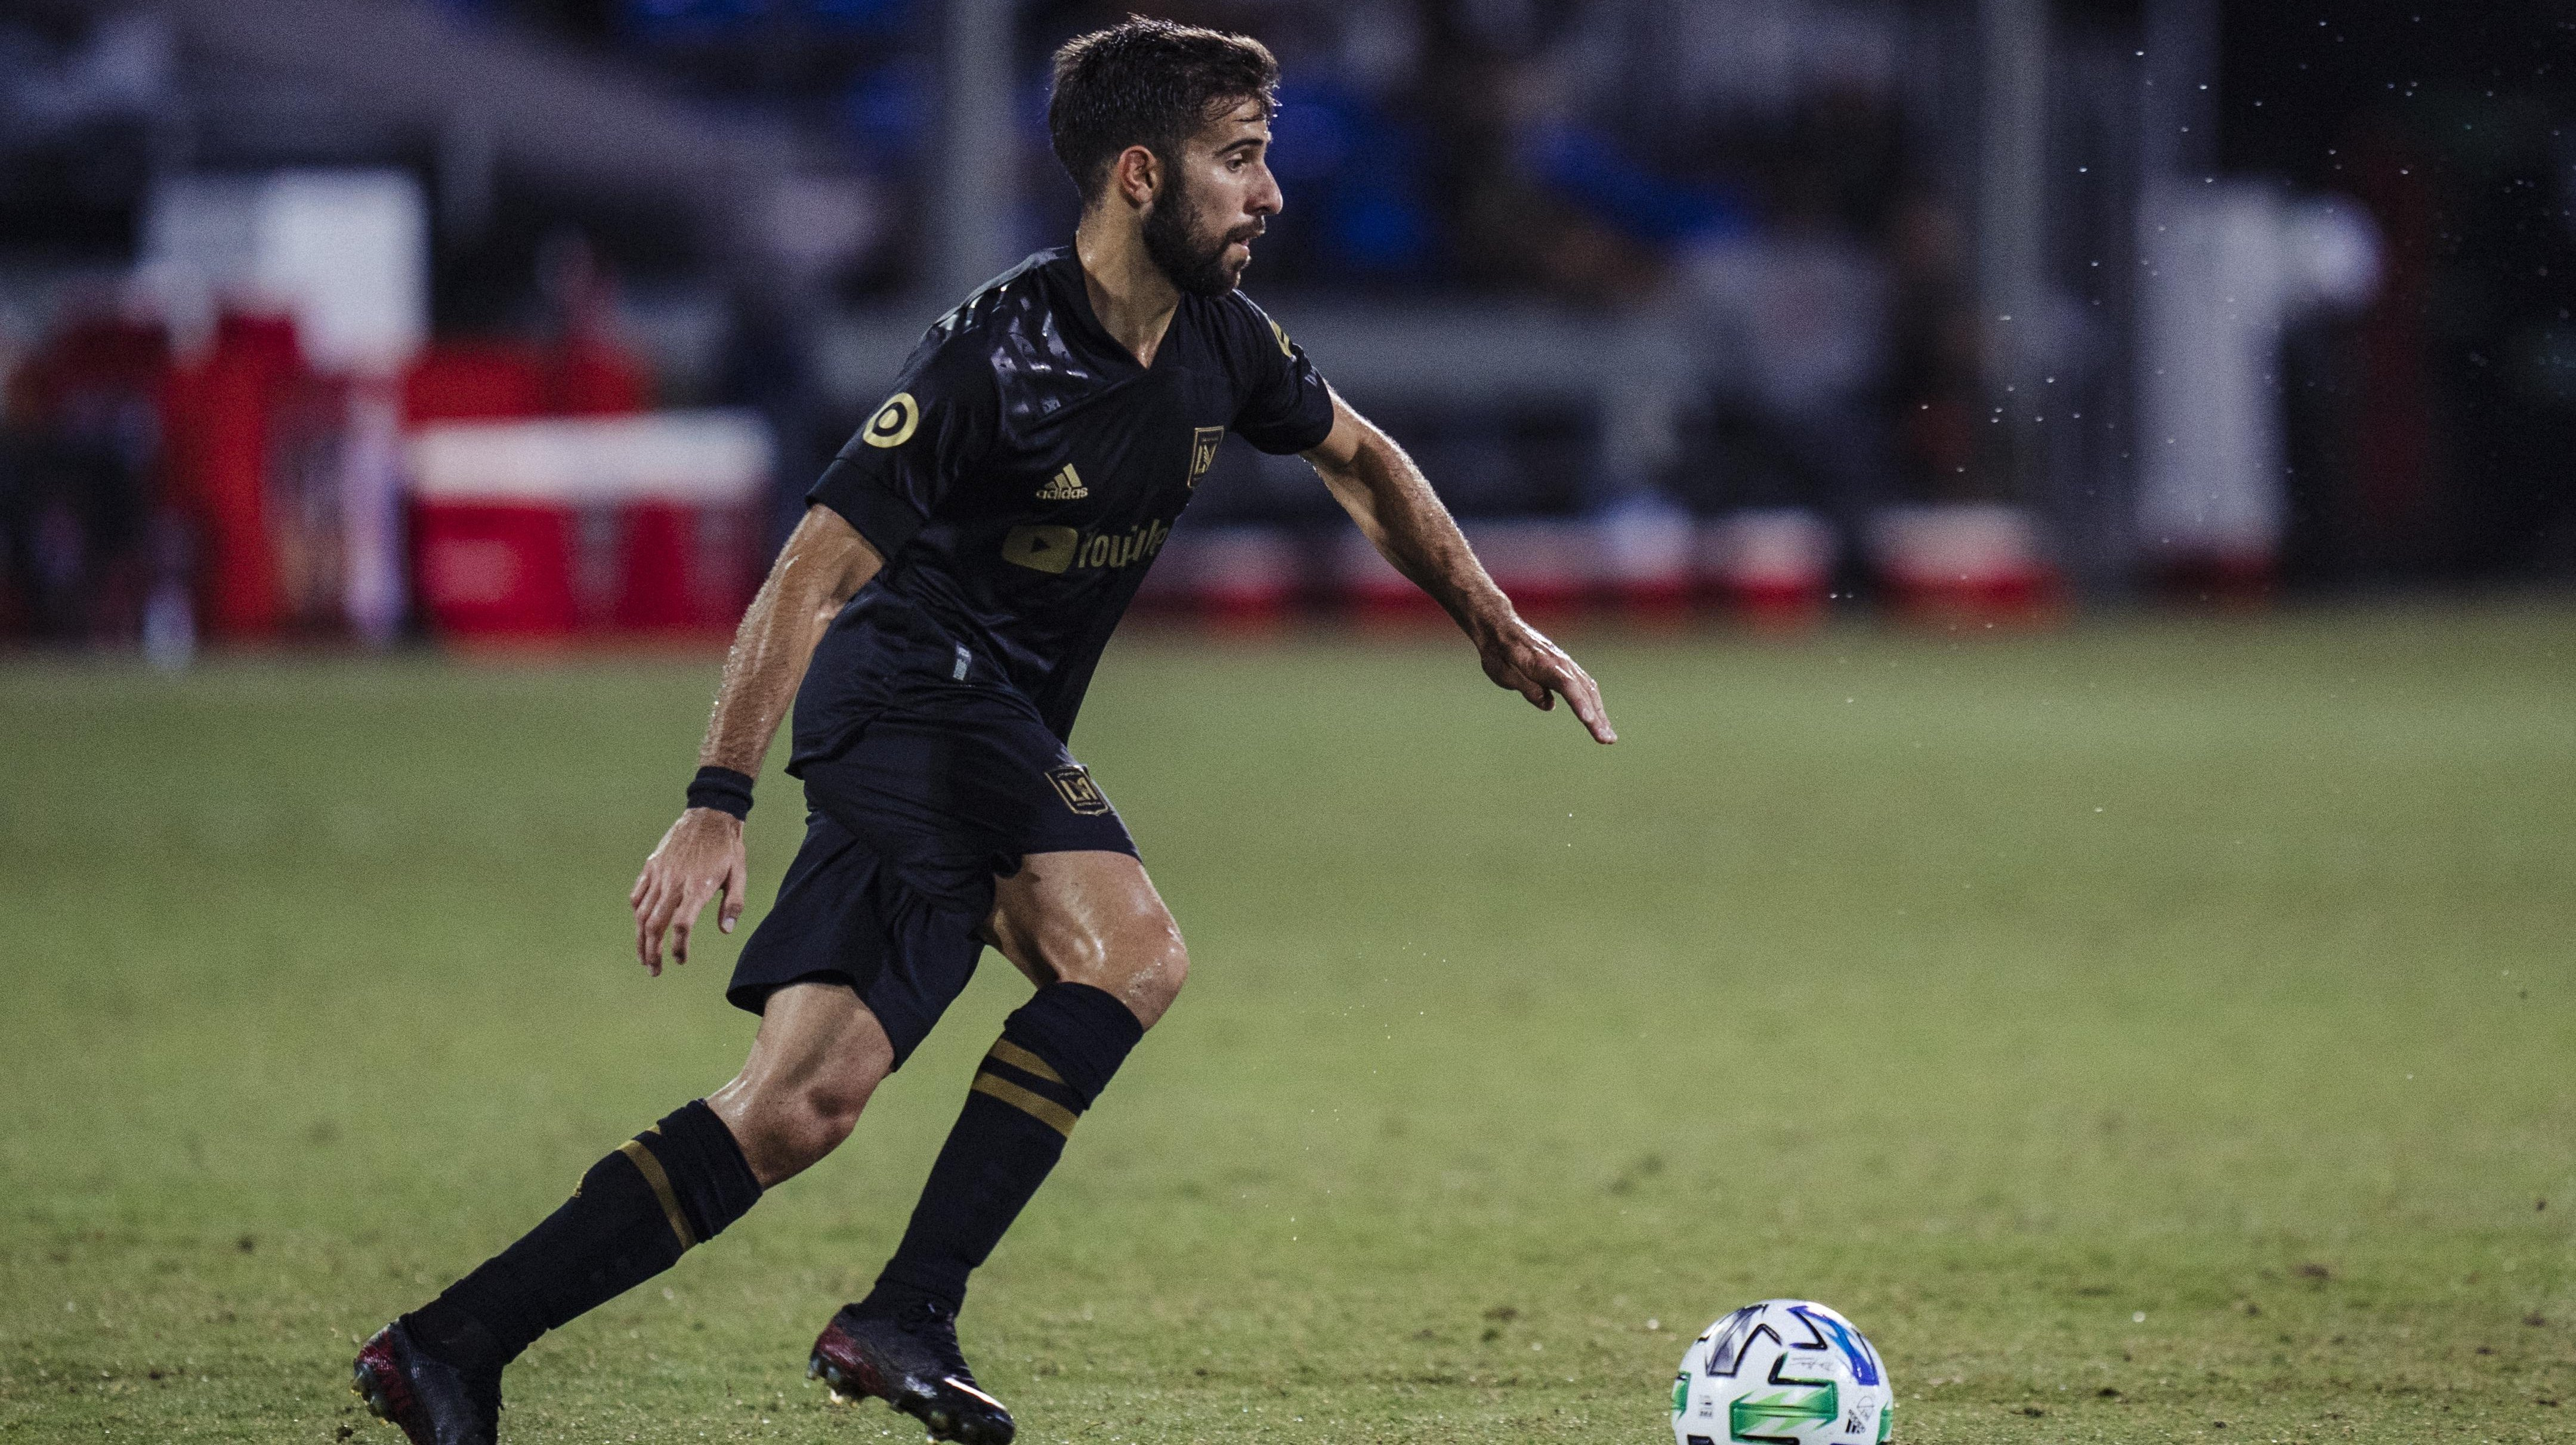 Diego Rossi wins MLS Golden Boot - Youngest player in history to win the trophy | Transfermarkt